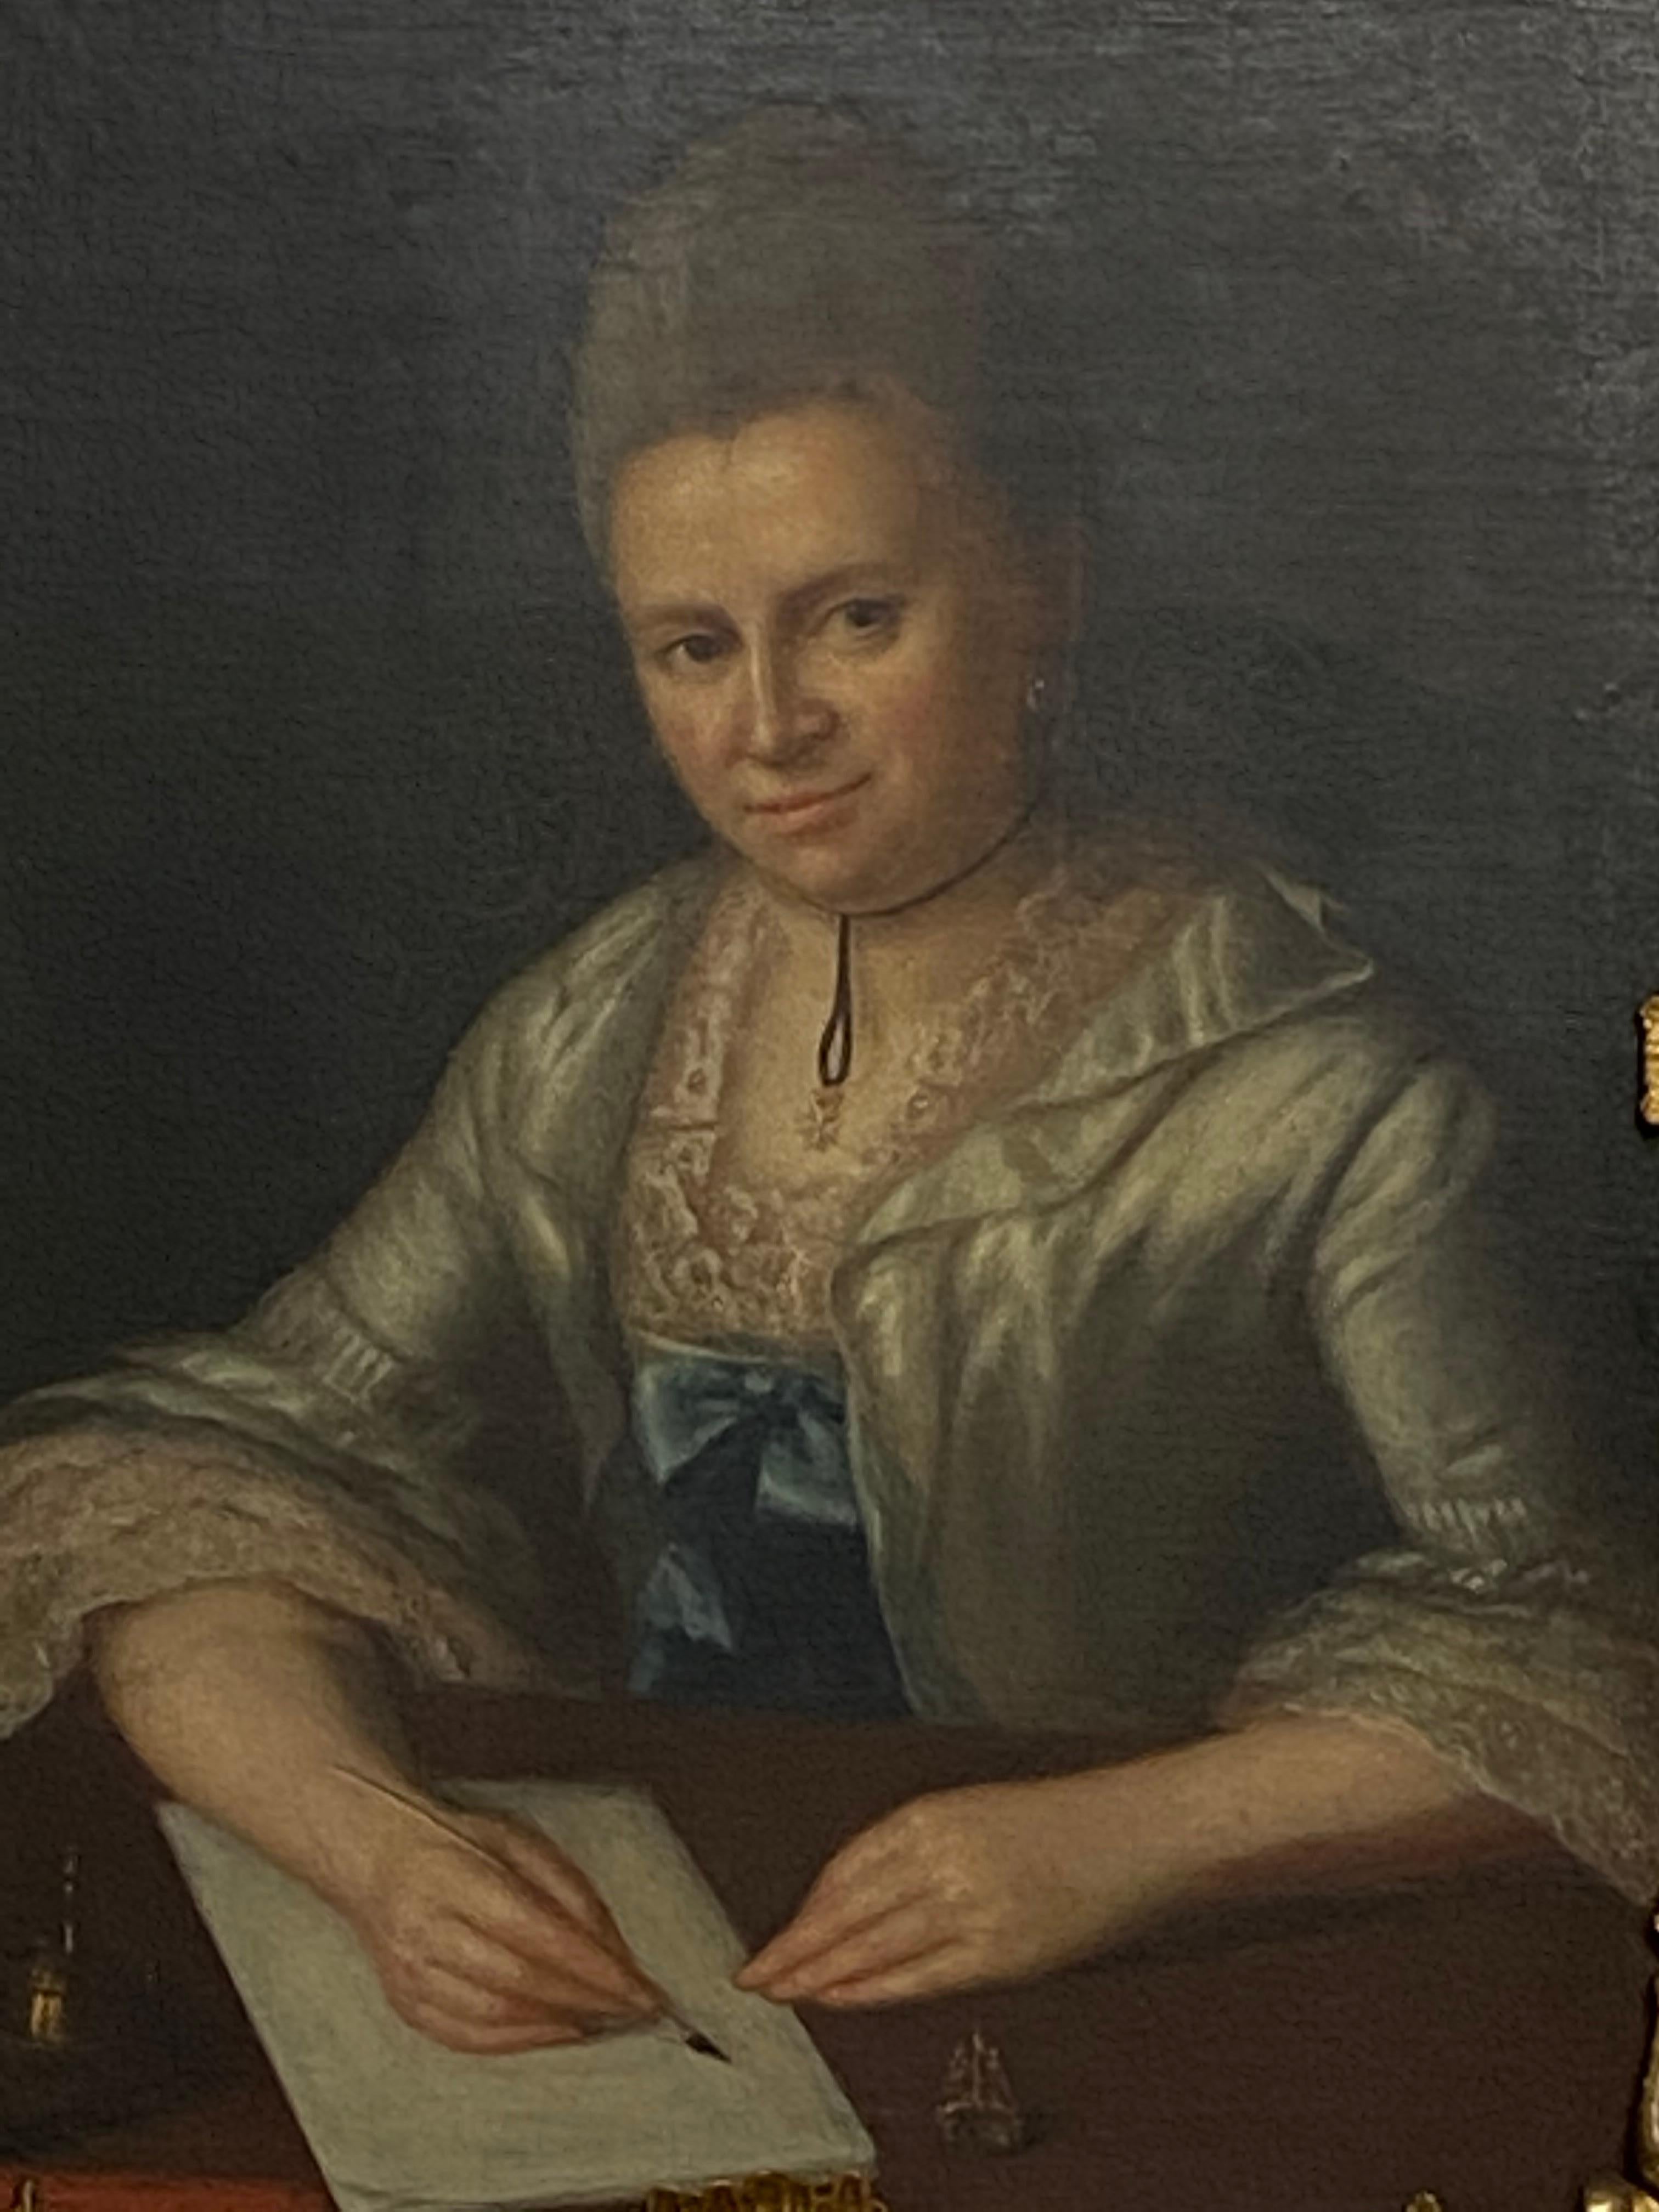 An 18th century French oil painting on canvas, mounted on board, of an aristocratic woman in the original period frame. Cleaned and conserved in the first half of the 20th century. In excellent condition. 

The measurements below include the